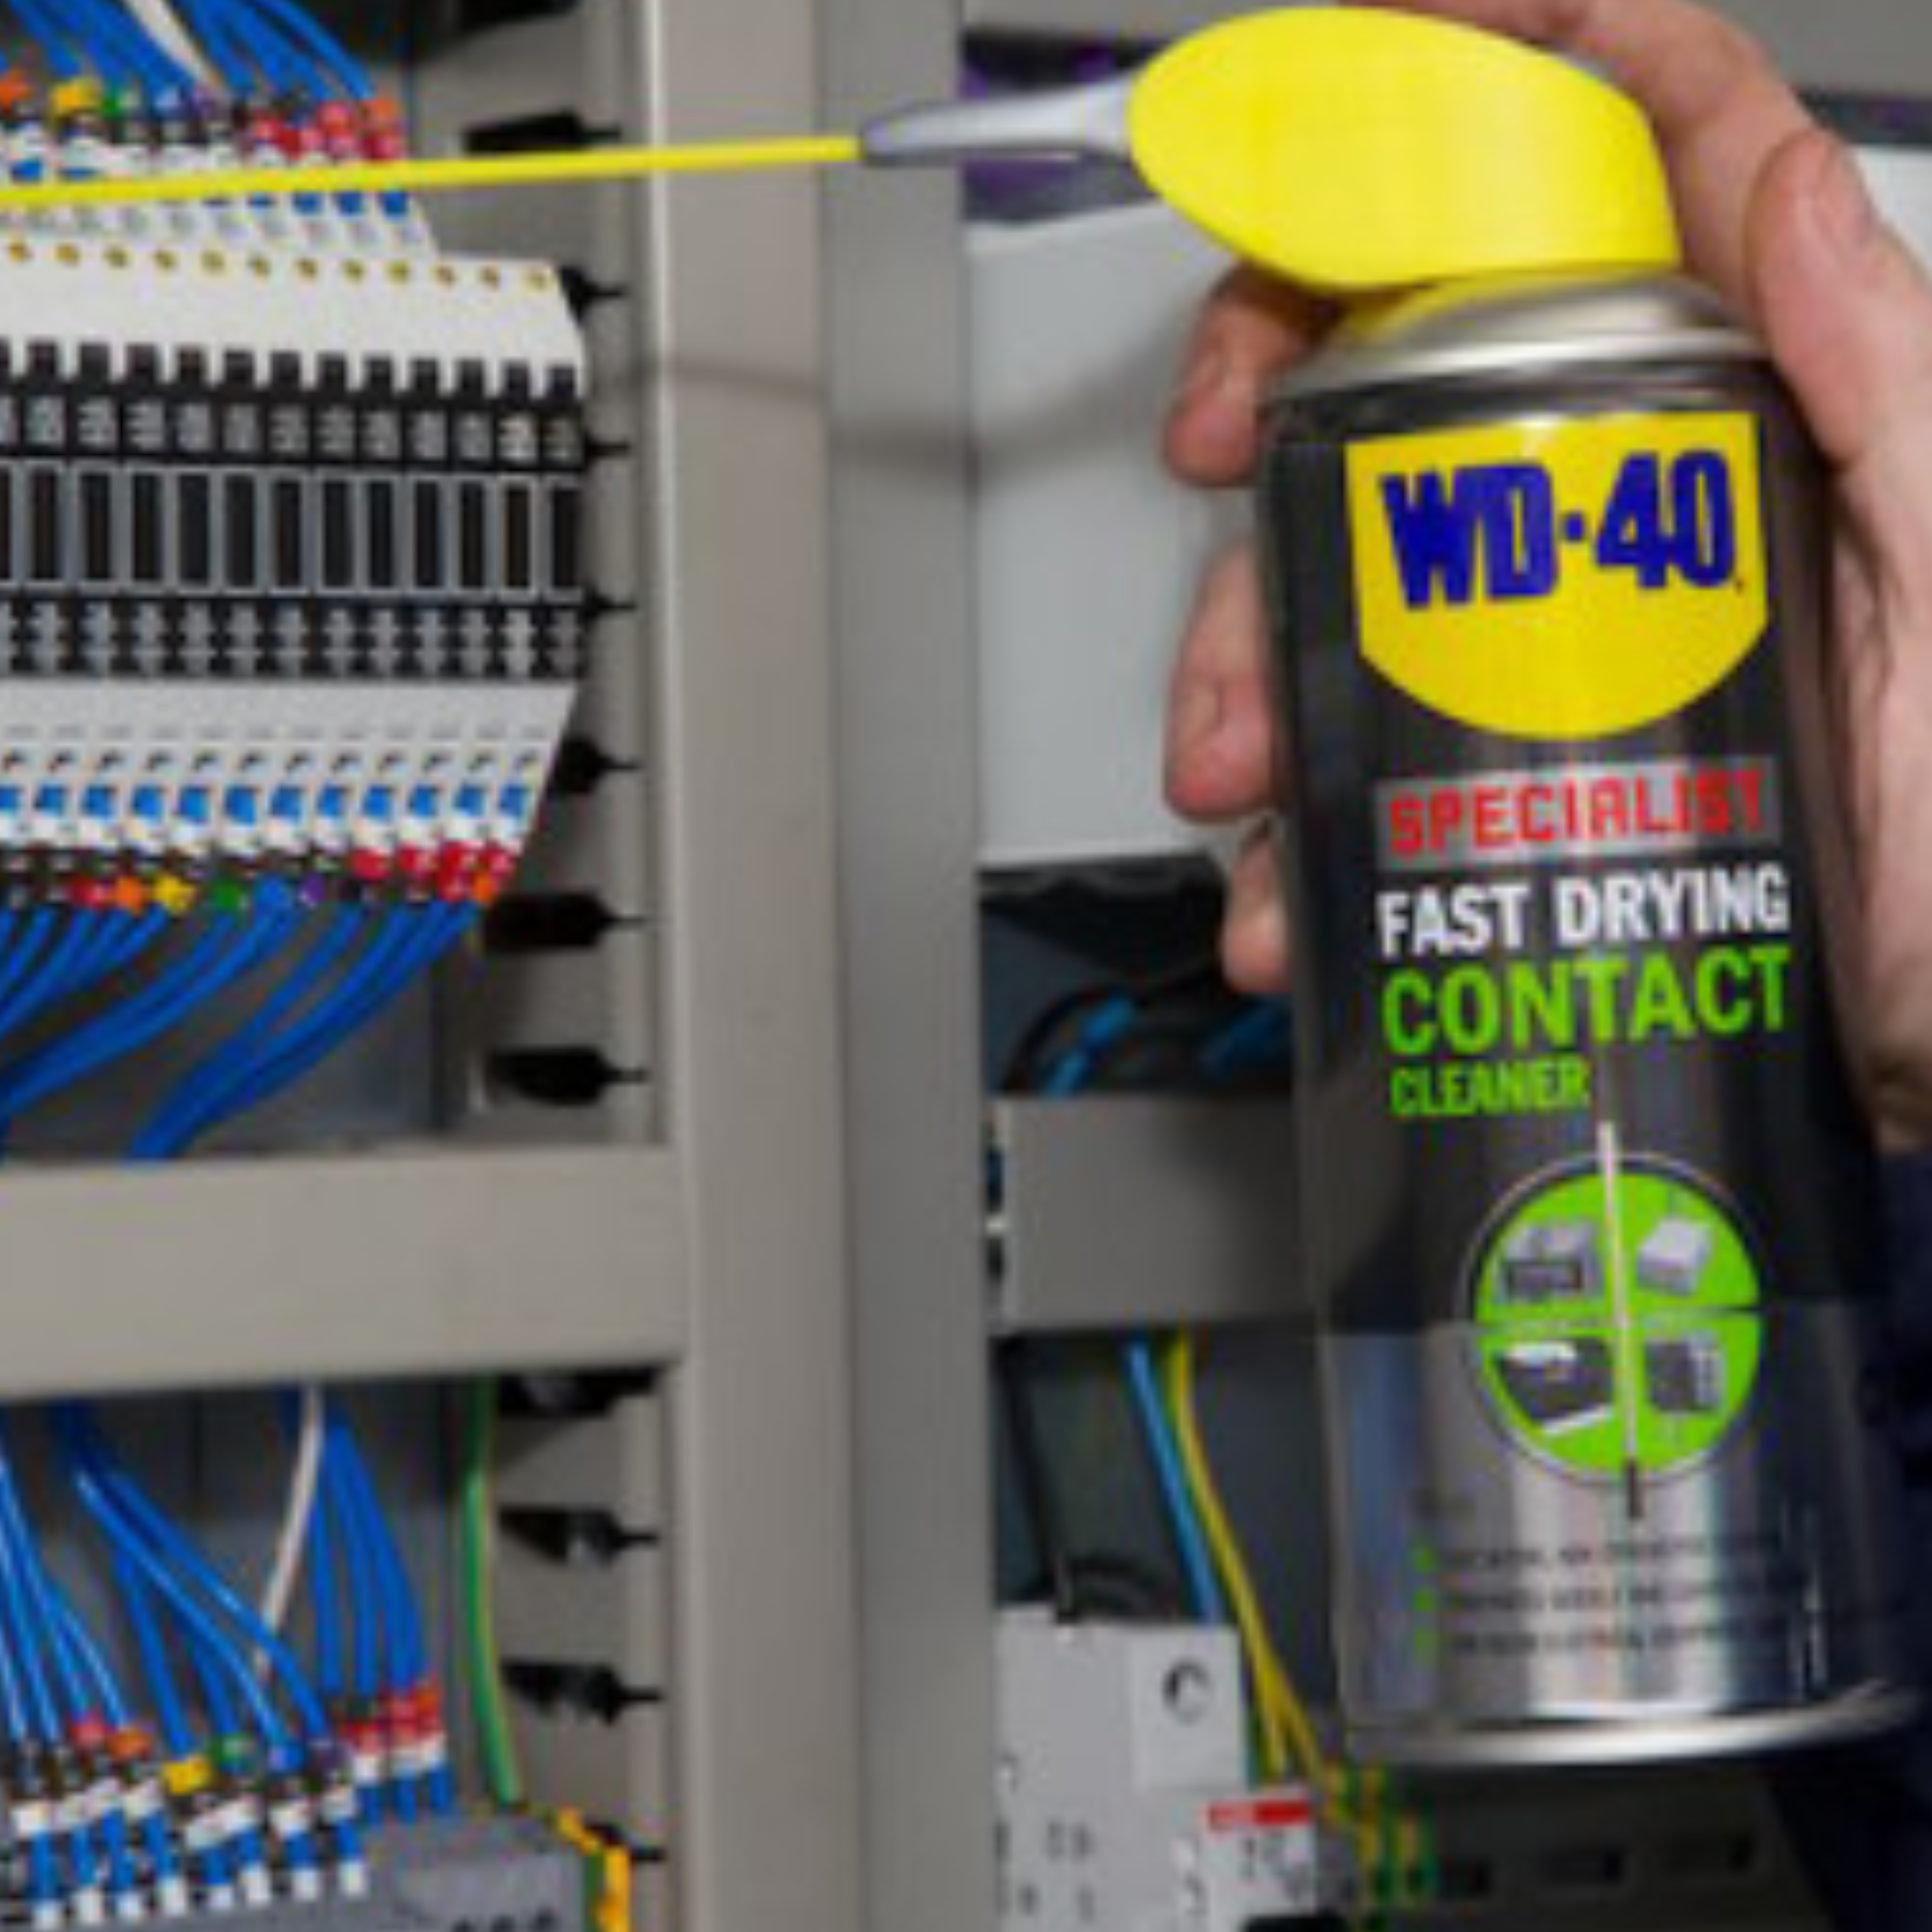 Wd 40 Specialist Contact Cleaner 400 ml